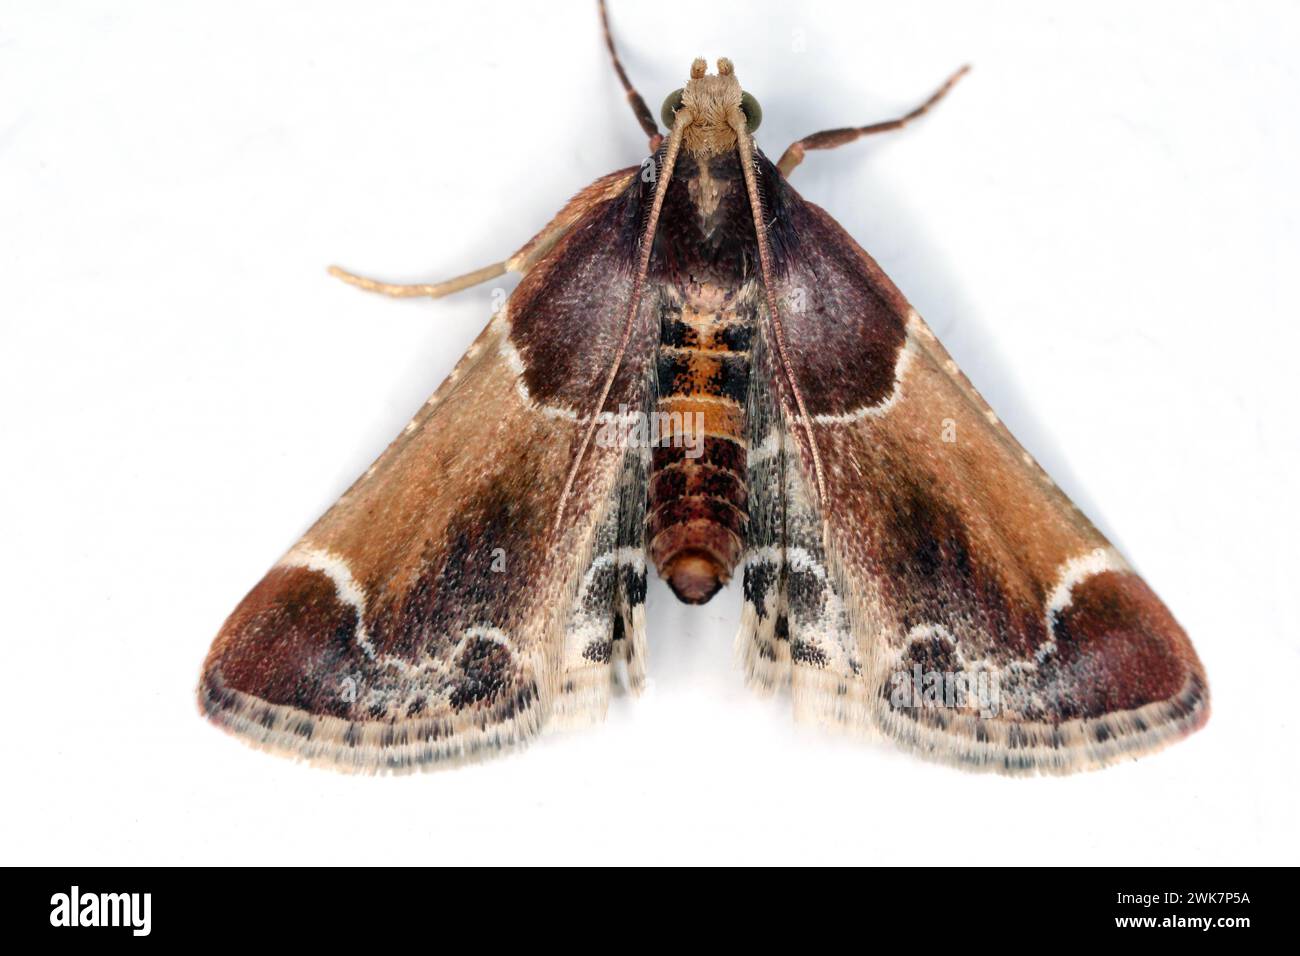 The meal moth or meal snout moth (Pyralis farinalis) a cosmopolitan moth of the family Pyralidae. Caterpillars are pests of stored foods. Stock Photo